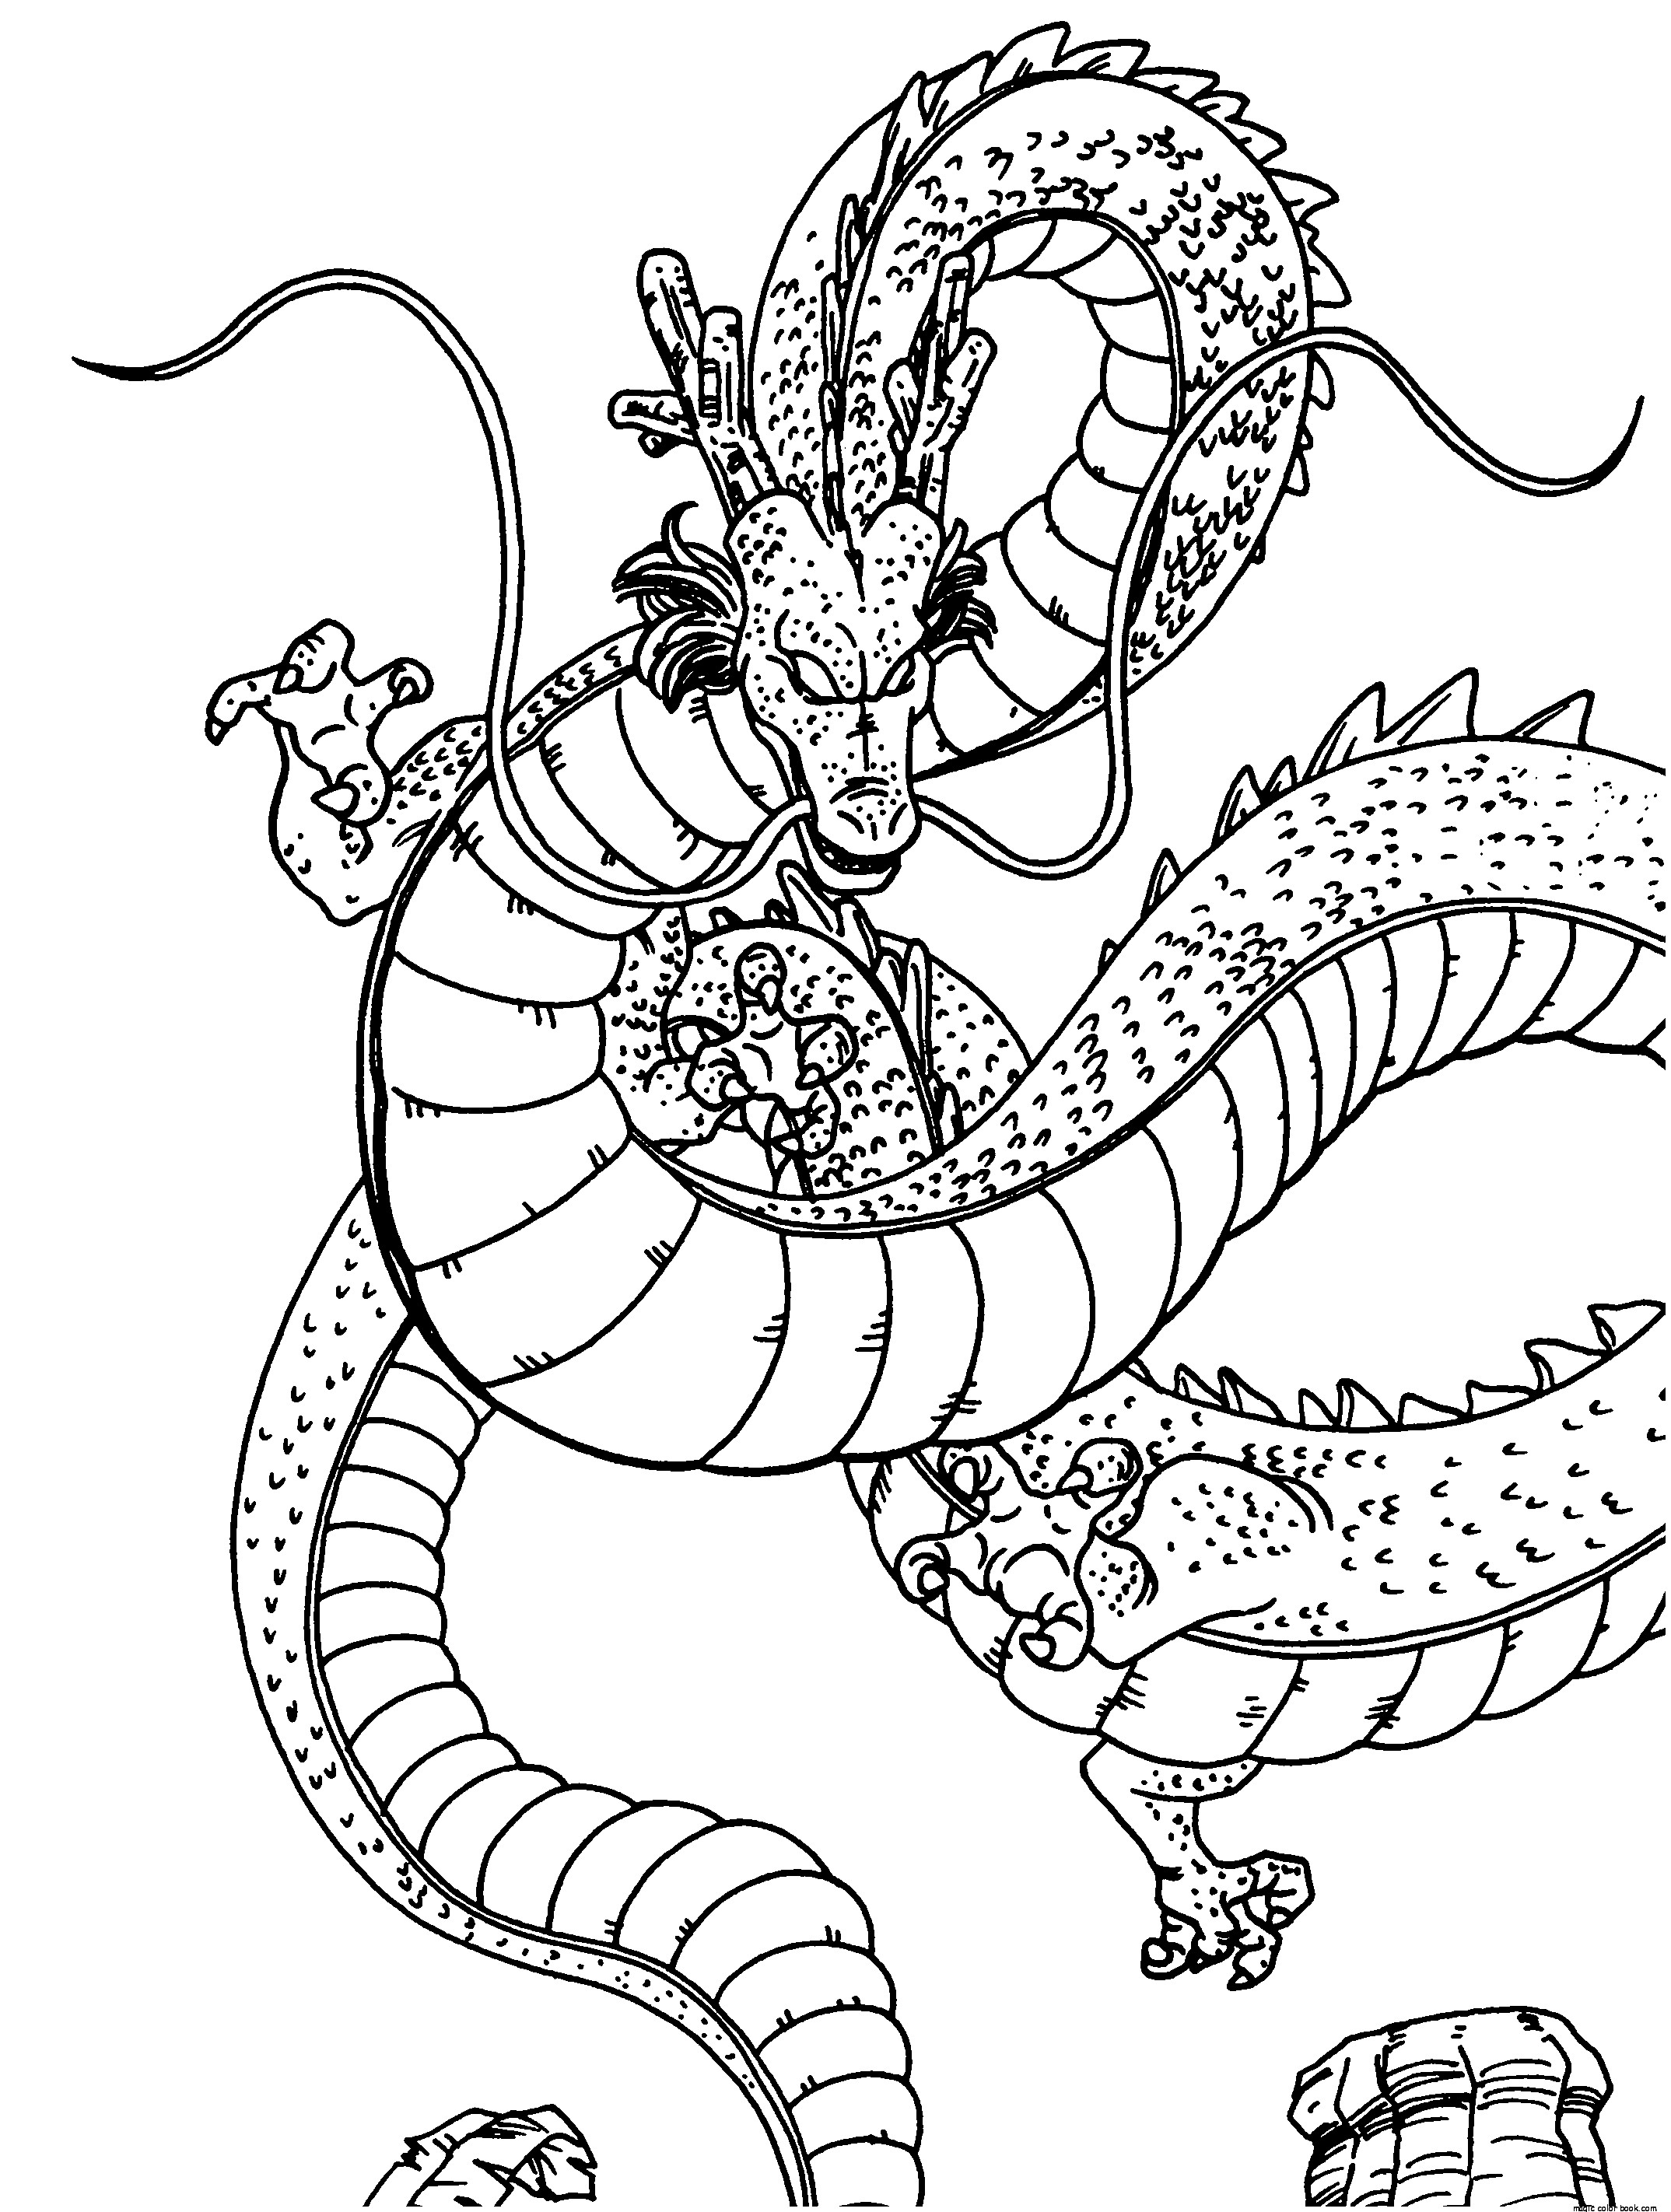 Free Dragon Ball Z Coloring Pages For Kids
 Dragon Ball Coloring Pages Best Coloring Pages For Kids